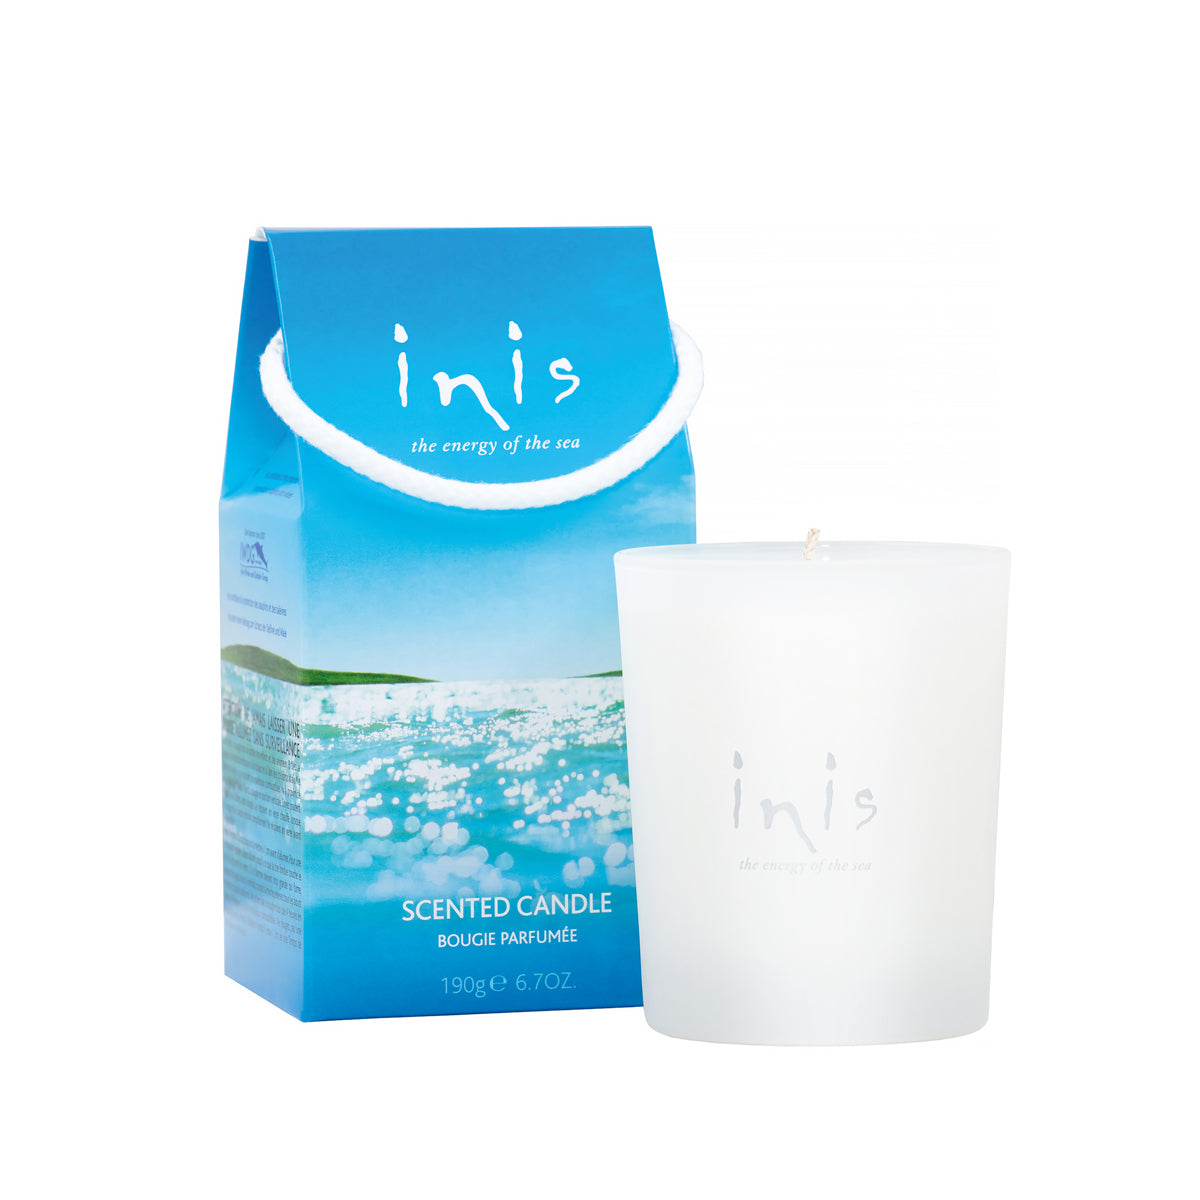 Inis Scented Candle, 6.7 oz